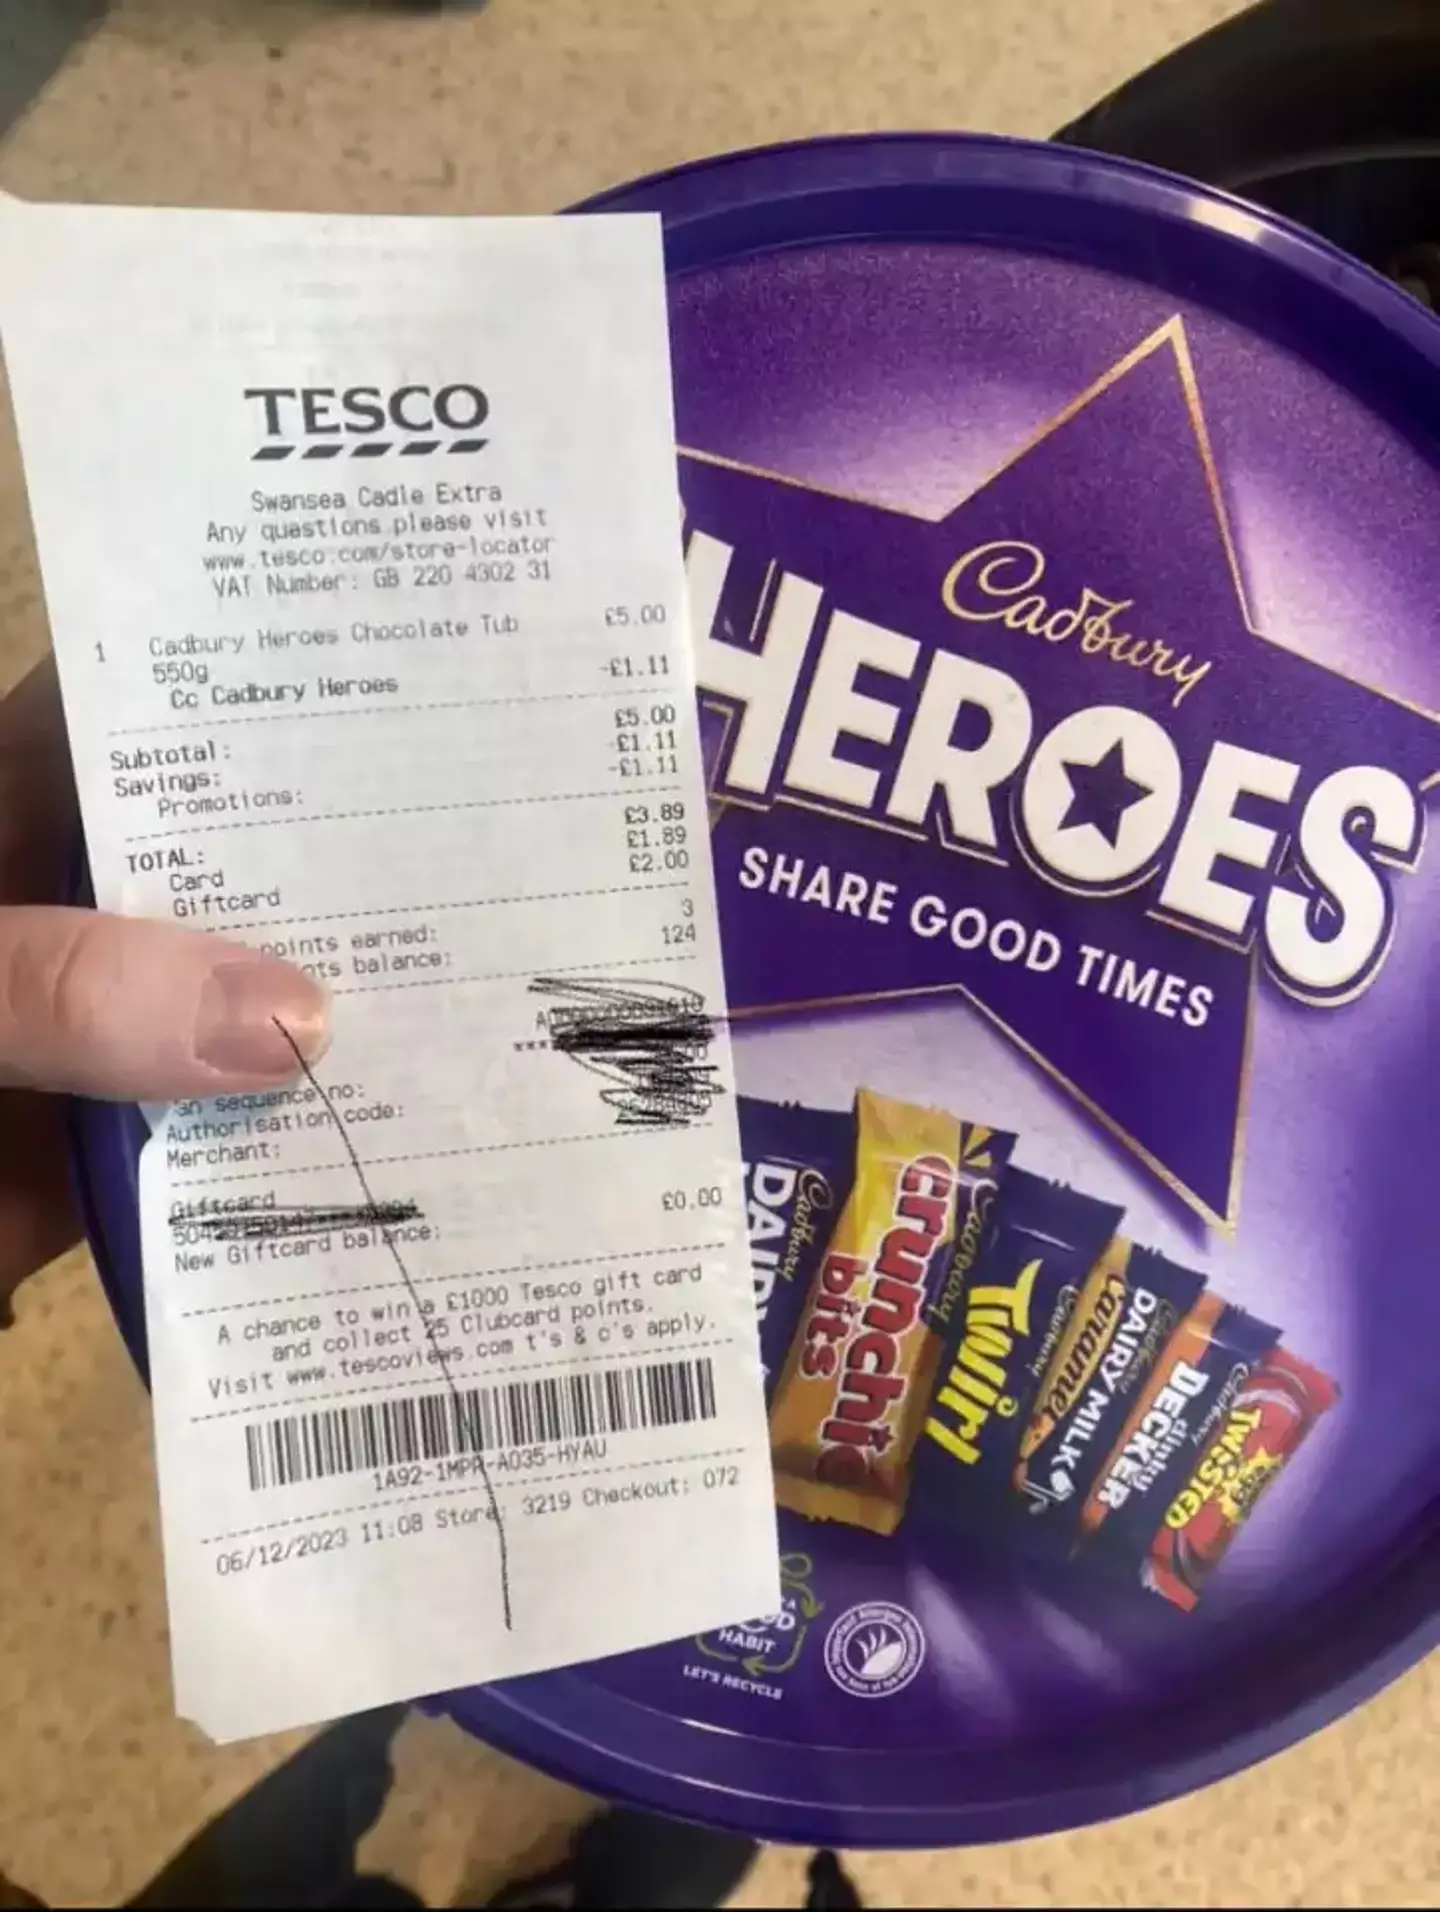 The box of chocolates usually retails at Tesco for £5.